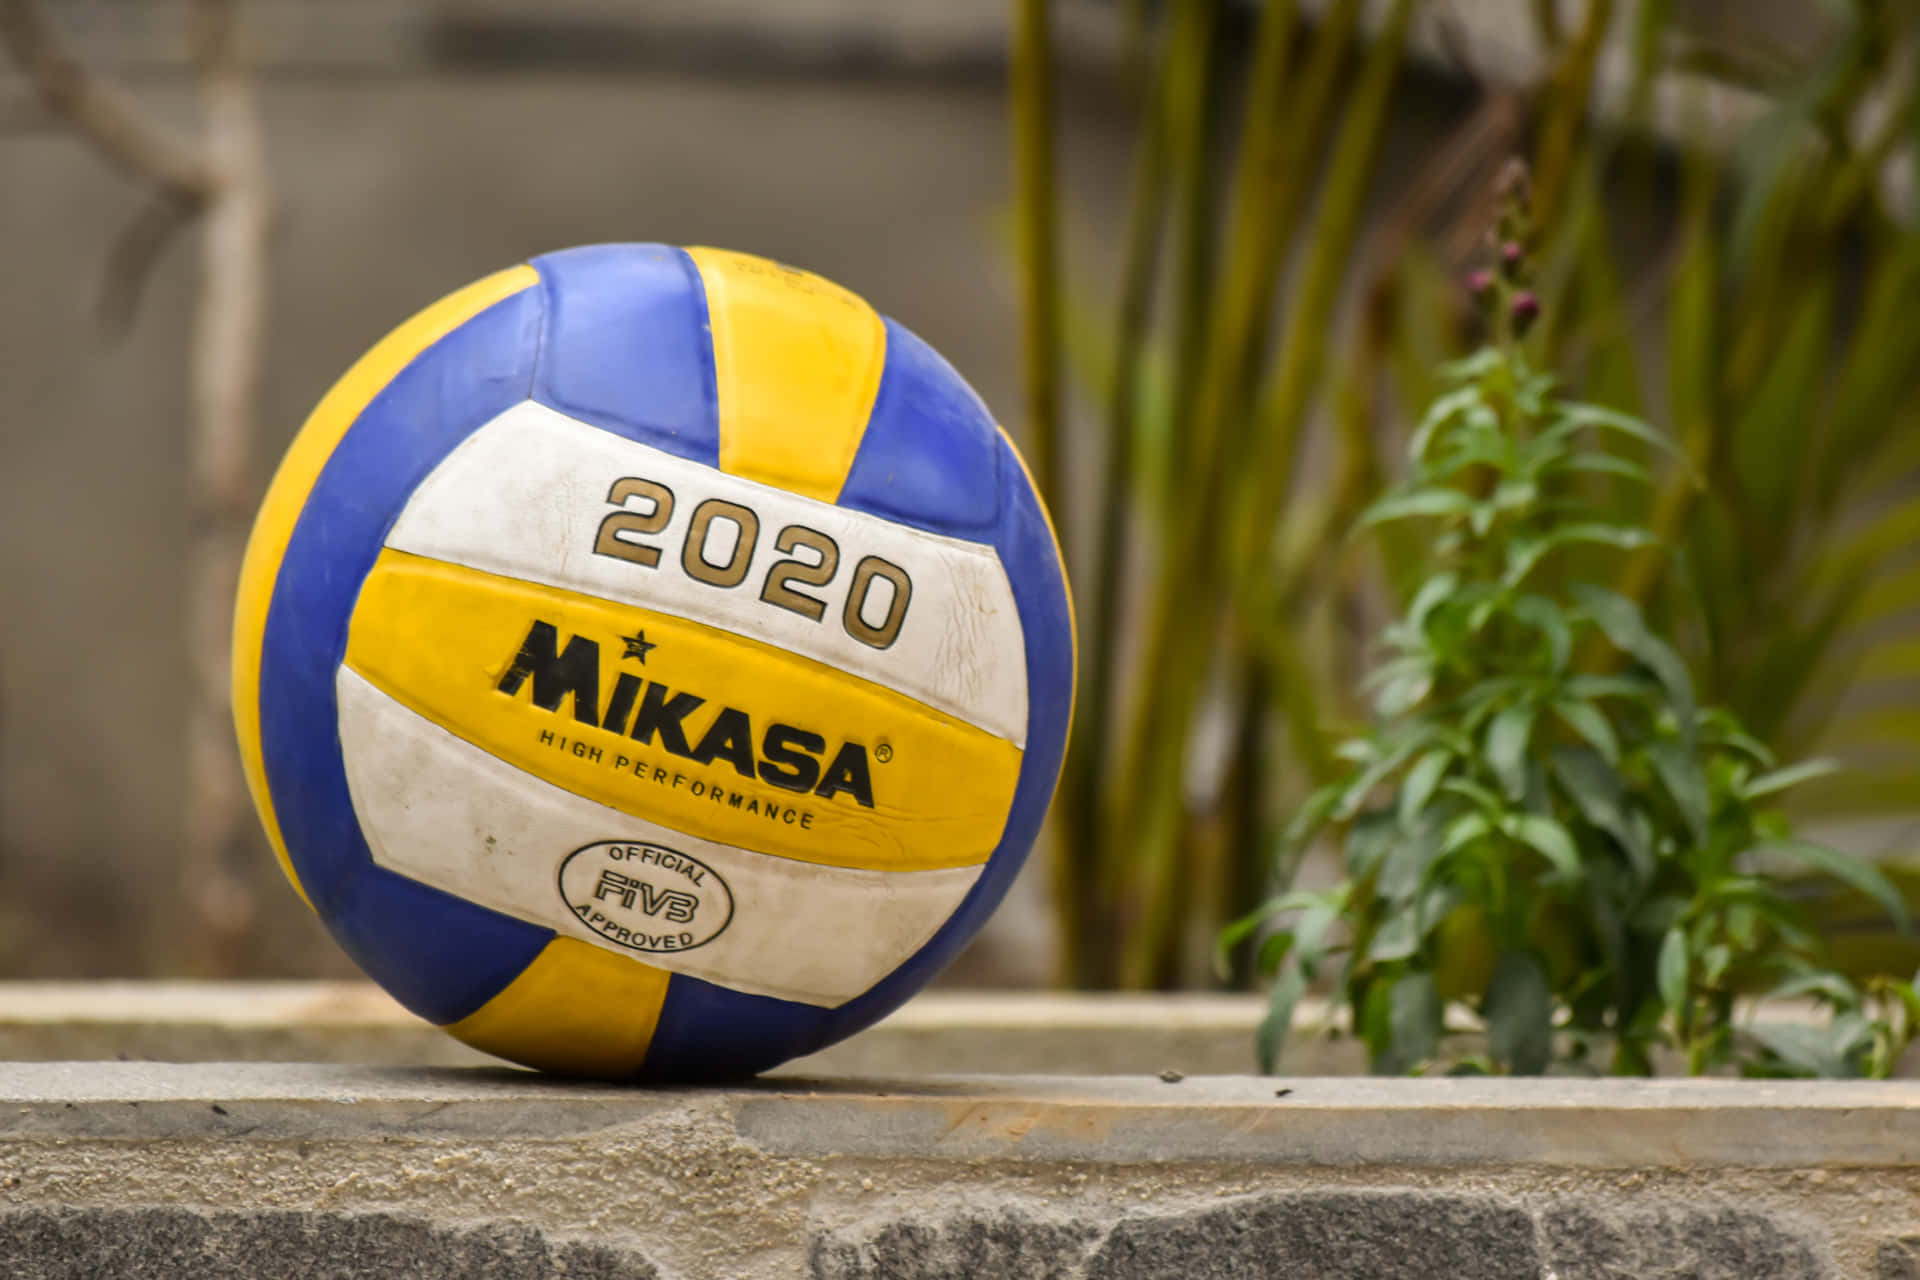 A volleyball ball ready for play! Wallpaper